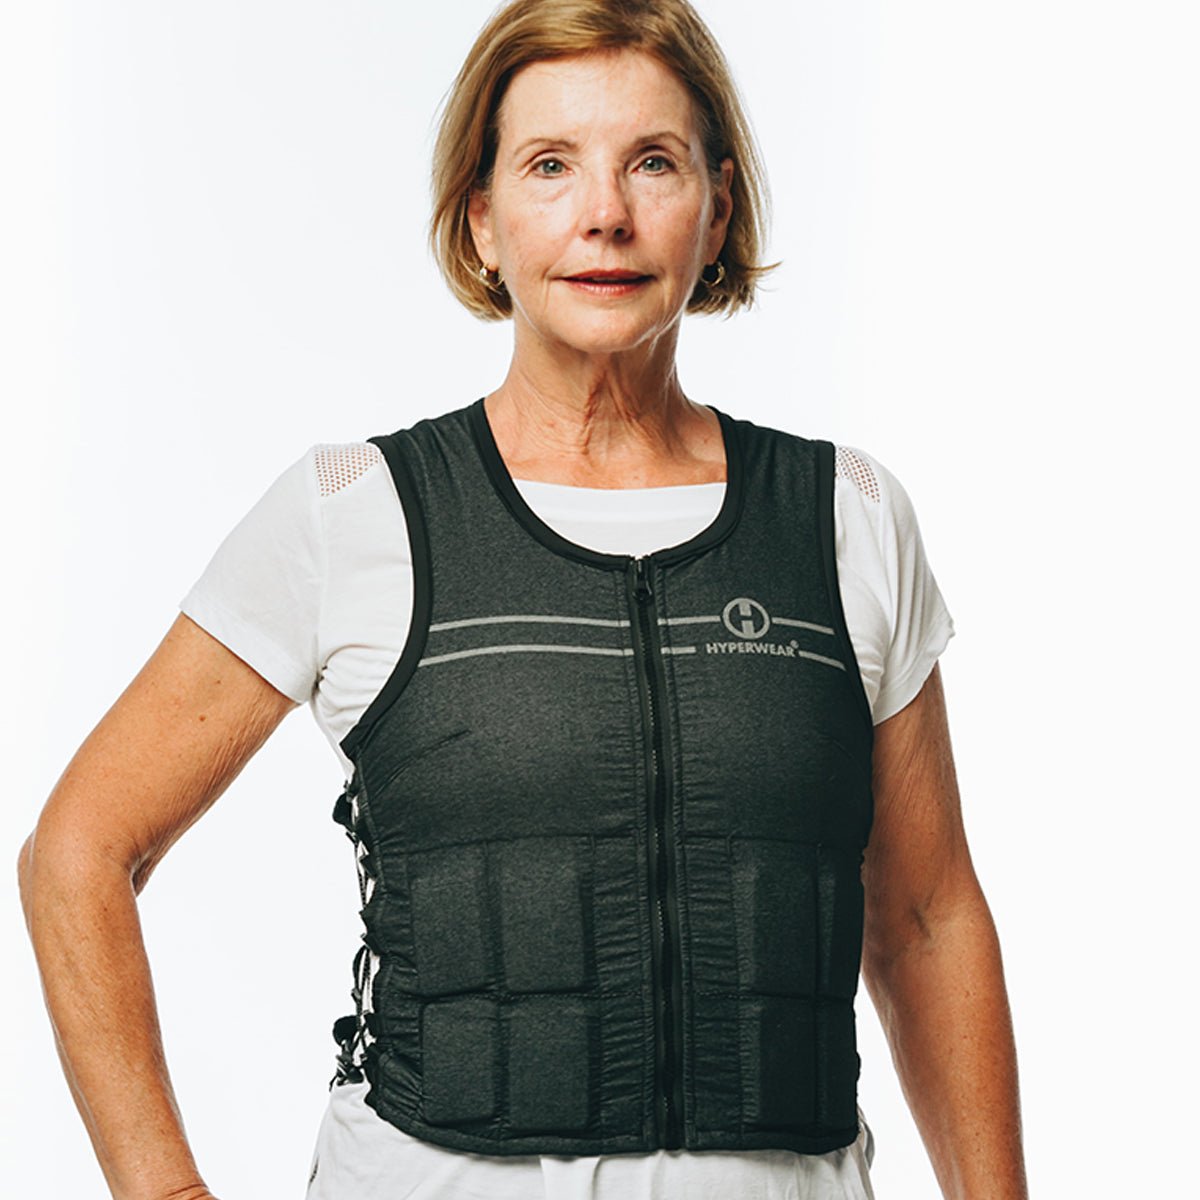 image of a woman modeling the hyper vest FIT weighted vest for women